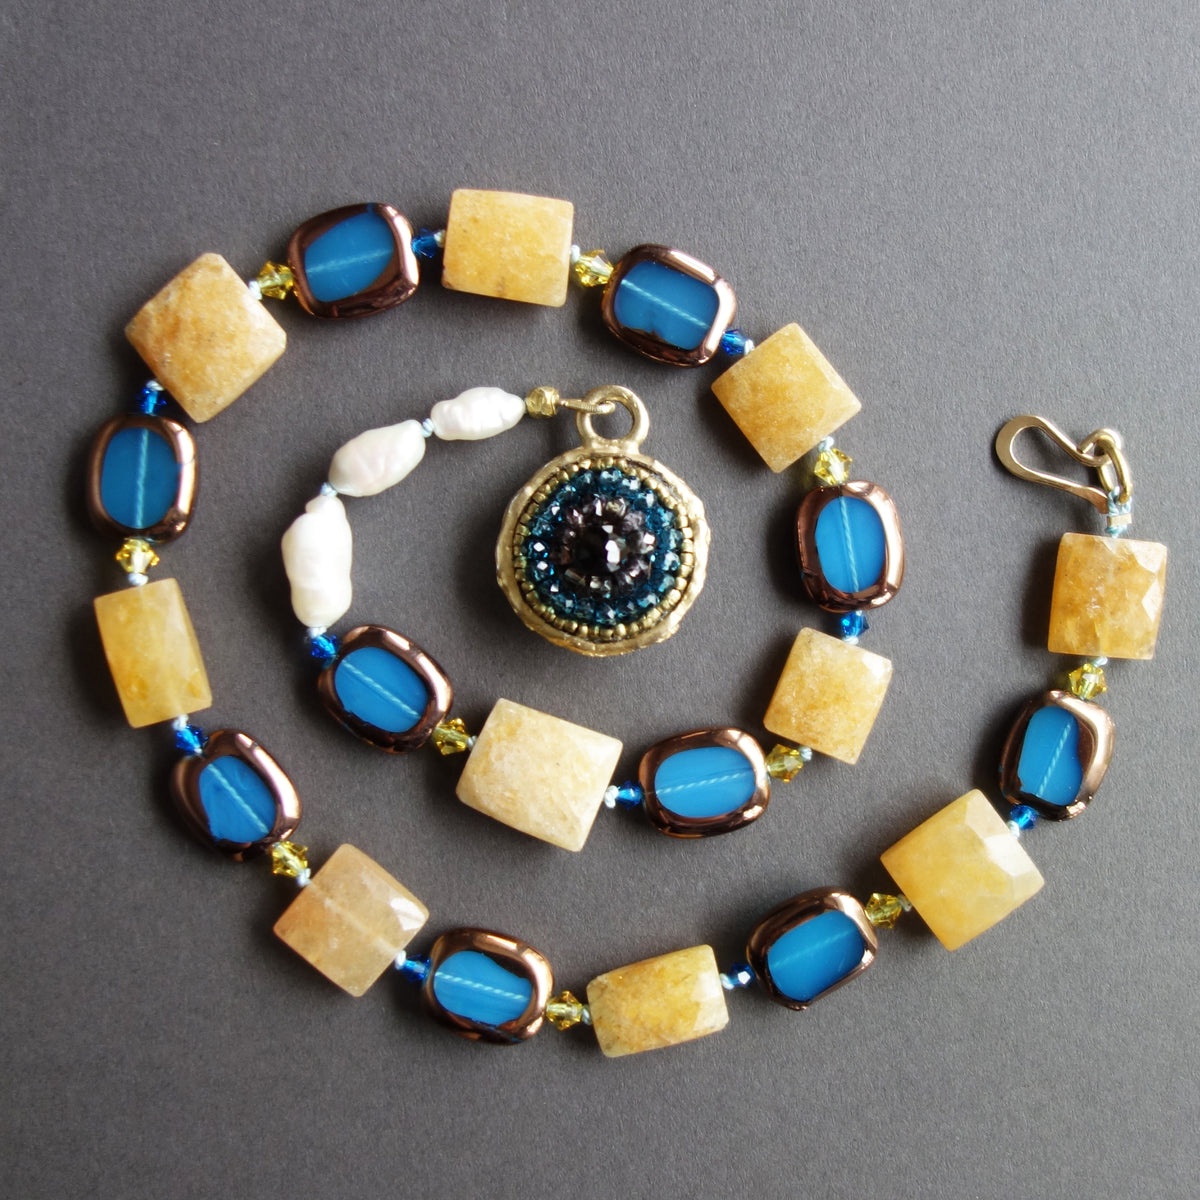 Sapphire, Pearl, and Jasper 2 Sided Mosaic Necklace (Wanderlust Paris)